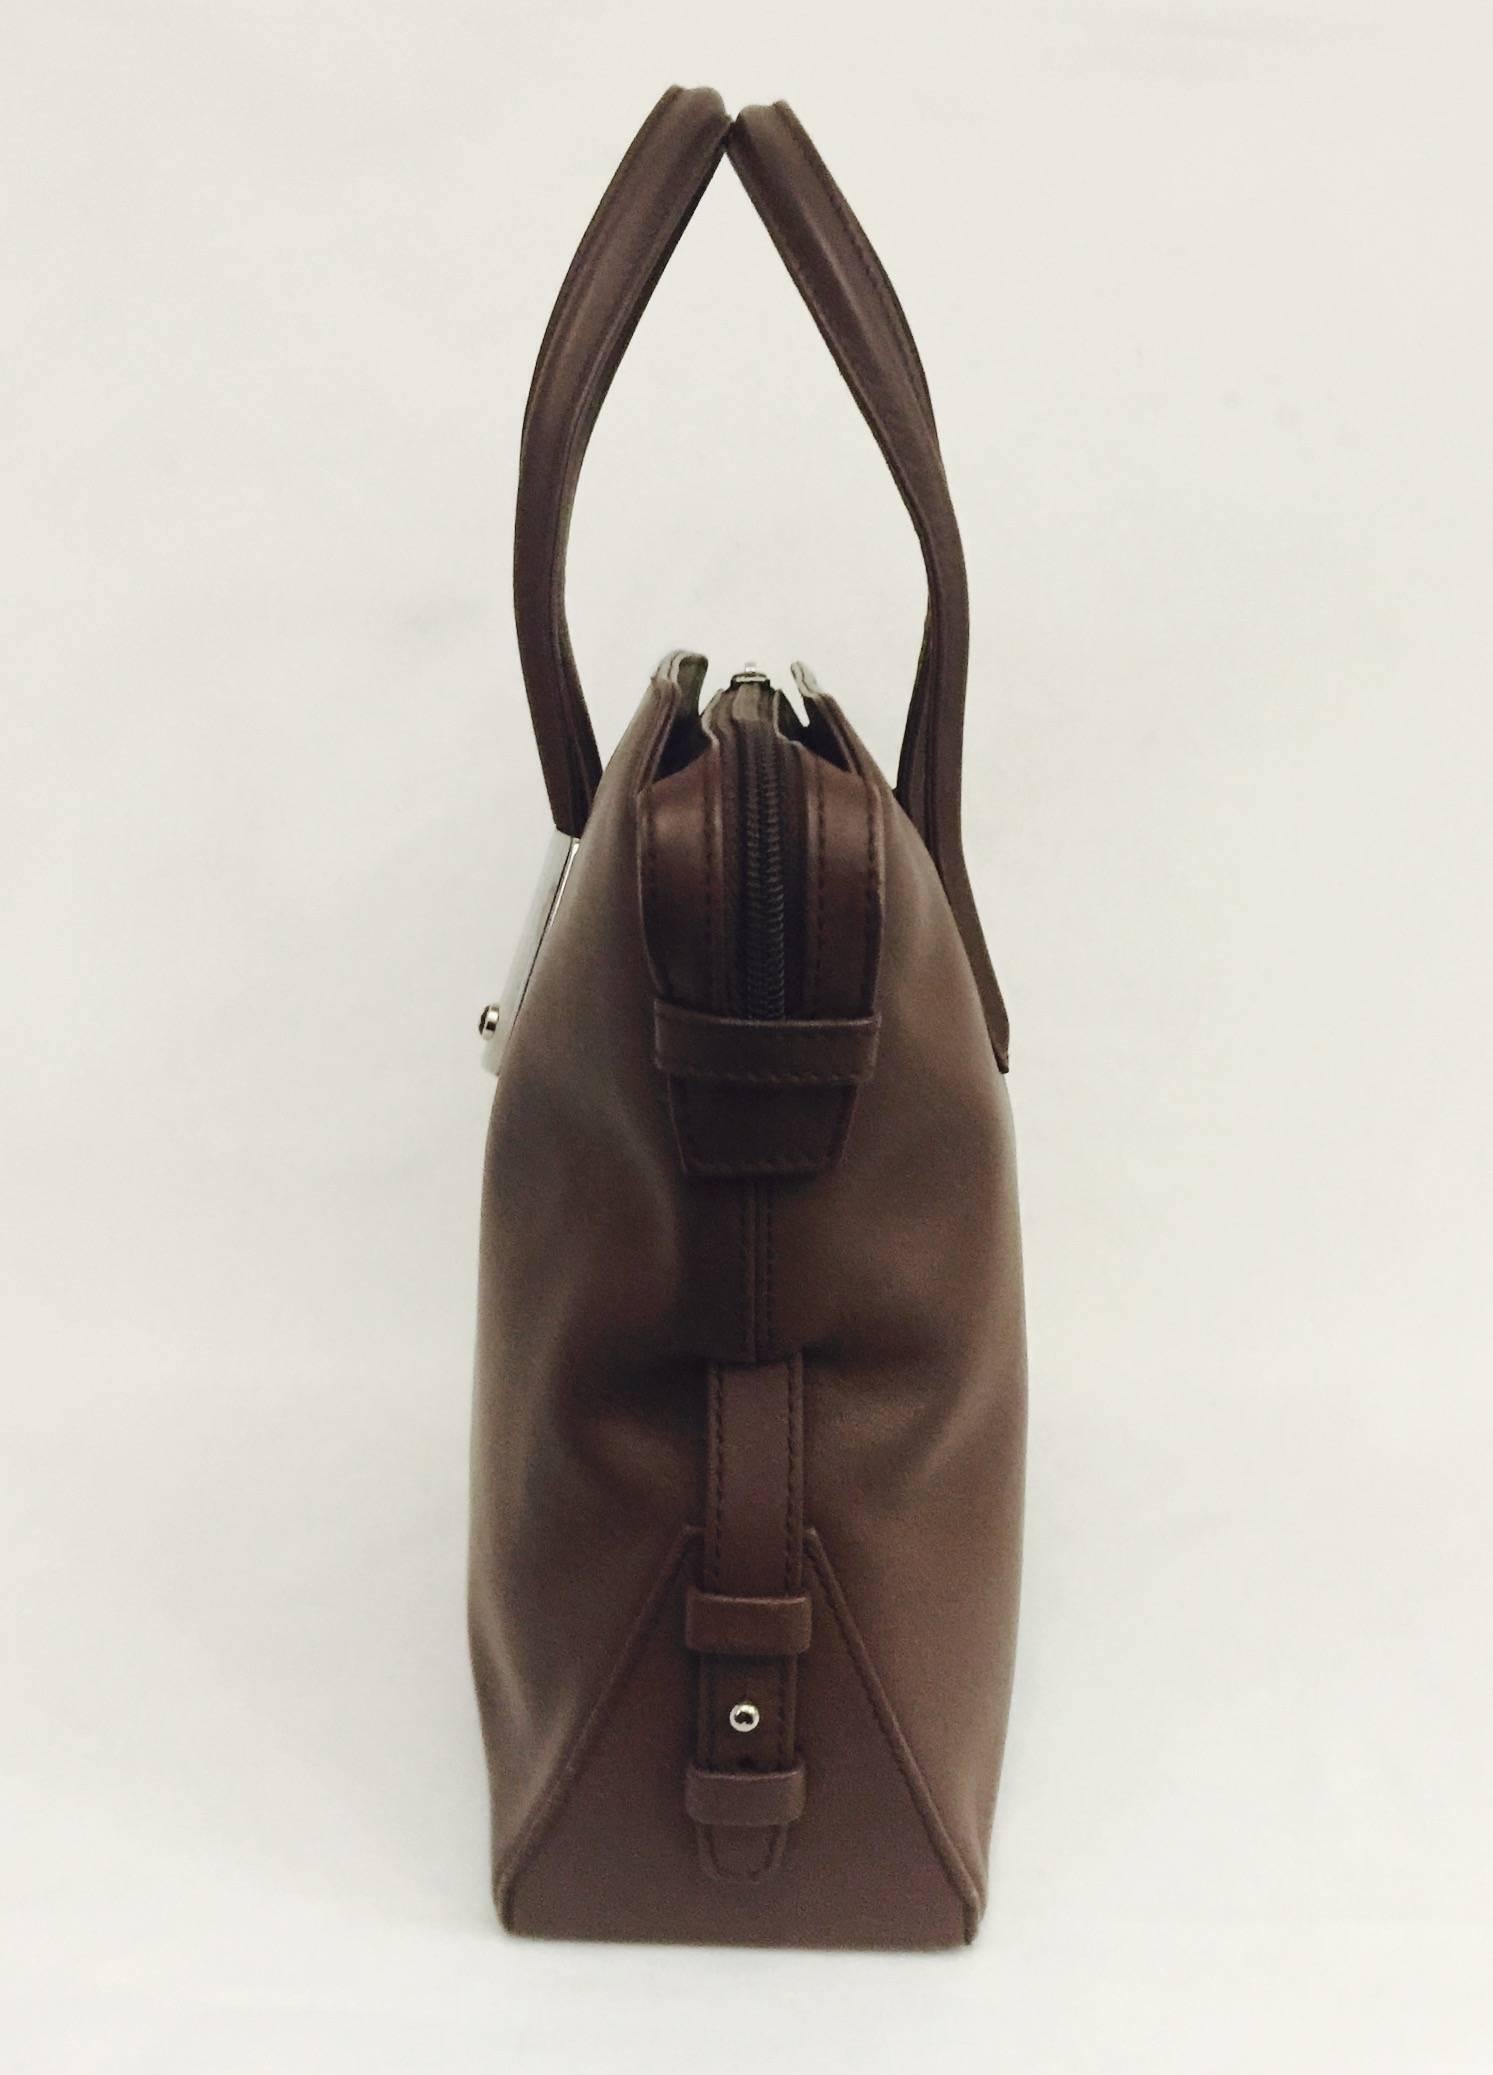 Montblanc craftsmanship resonates in this handsome handbag!  Features include 2 top flat handles and the Montblanc star logo on one of the handles in front of bag.  Zippered closure on top of bag offers security and reveals beige suede interior with